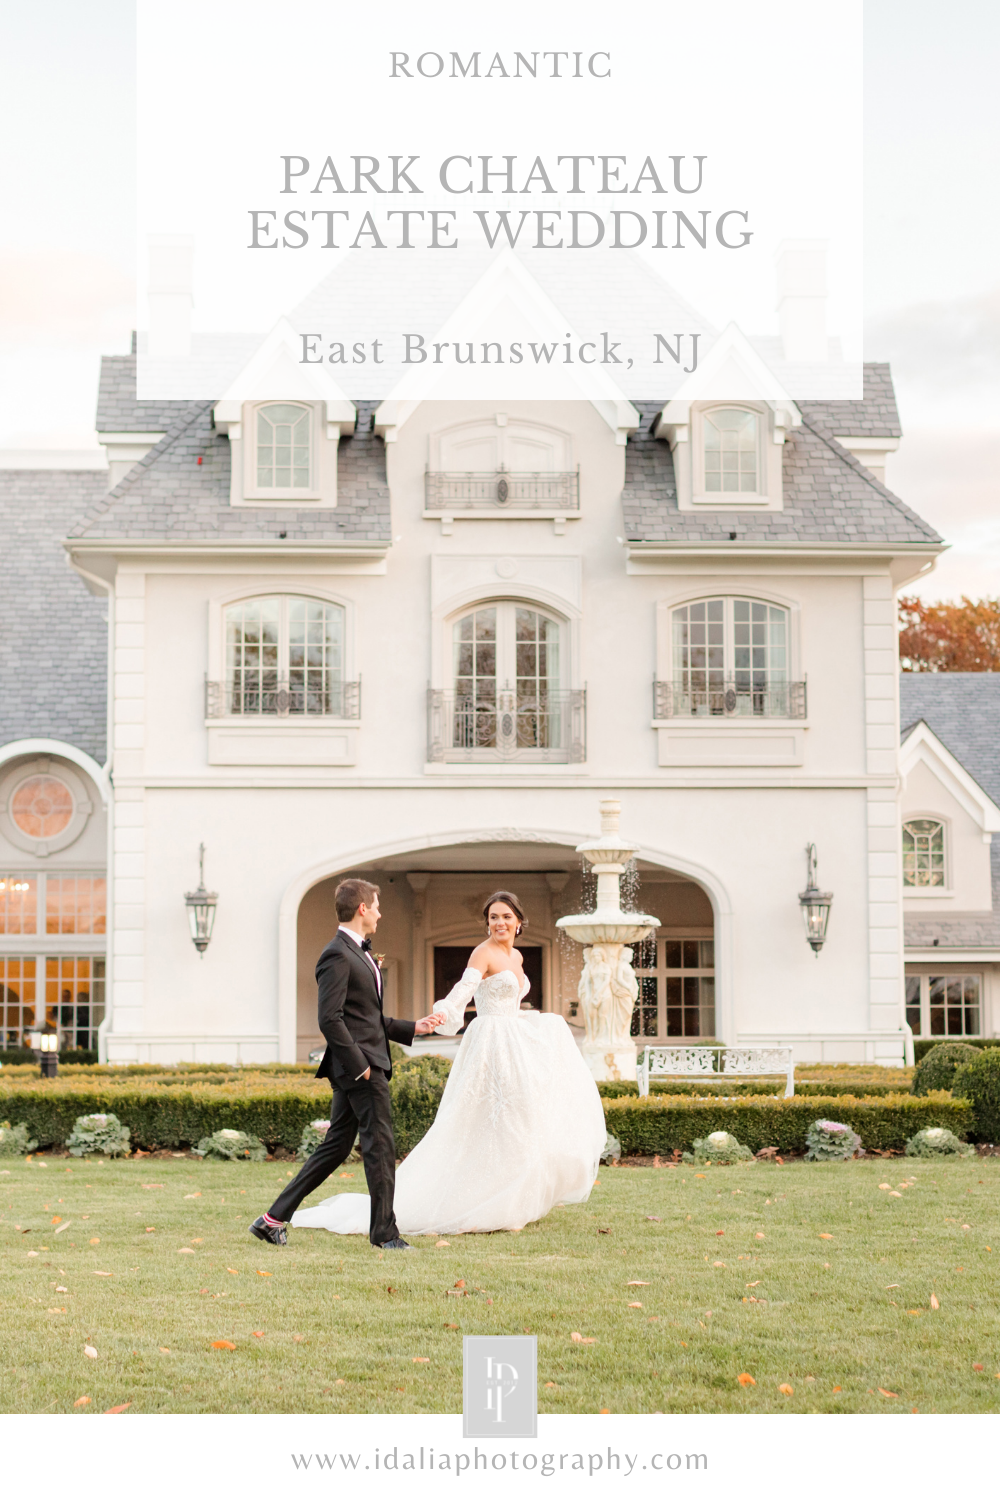 Romantic Park Chateau Estate Wedding in the fall photographed by NJ wedding photographer Idalia Photography